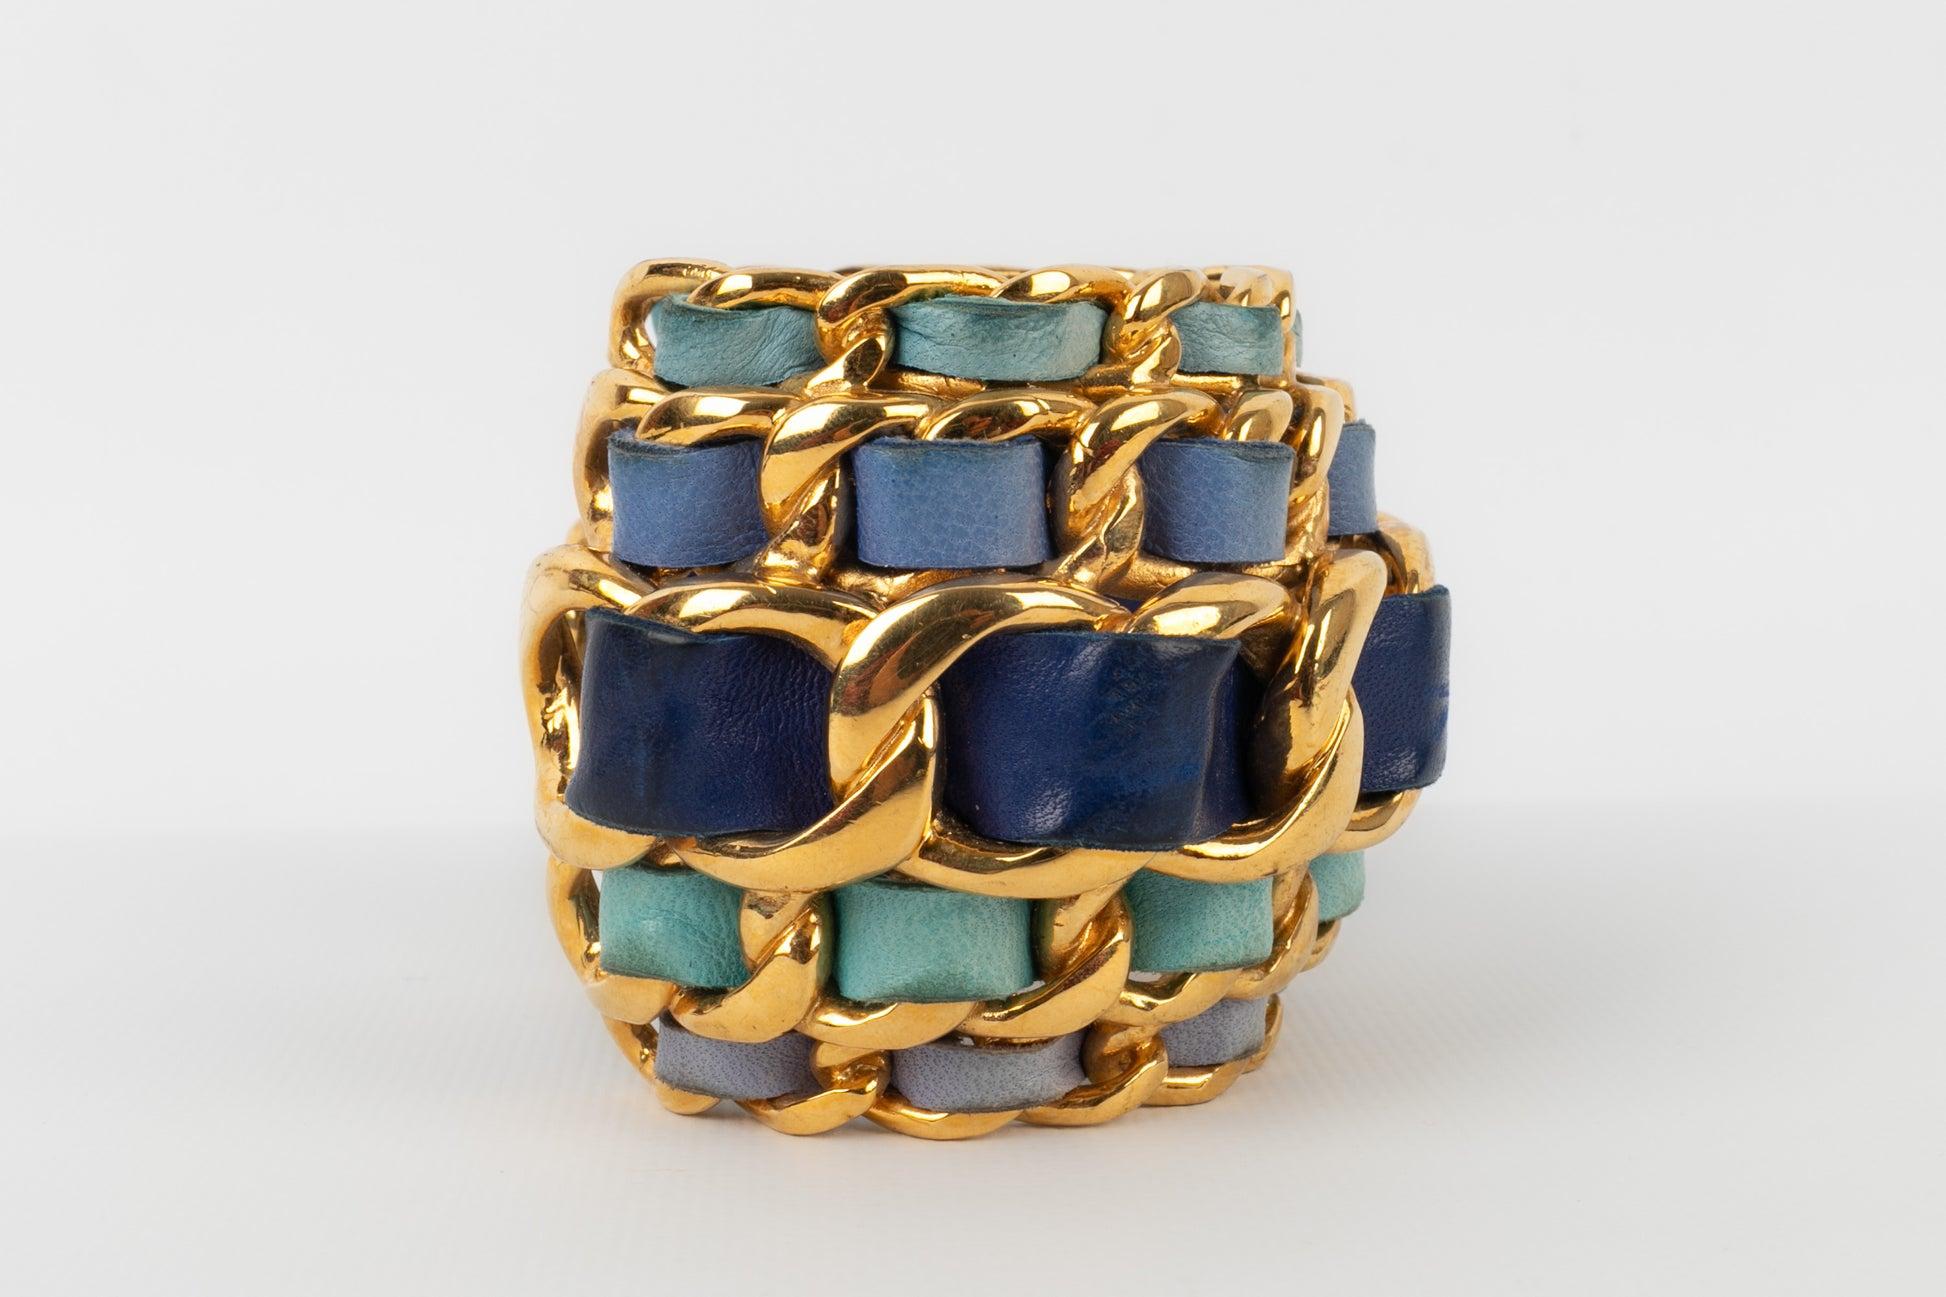 Chanel Cuff Bracelet in Golden Metal Interlaced with Blue Tone Leather, 1991 For Sale 1